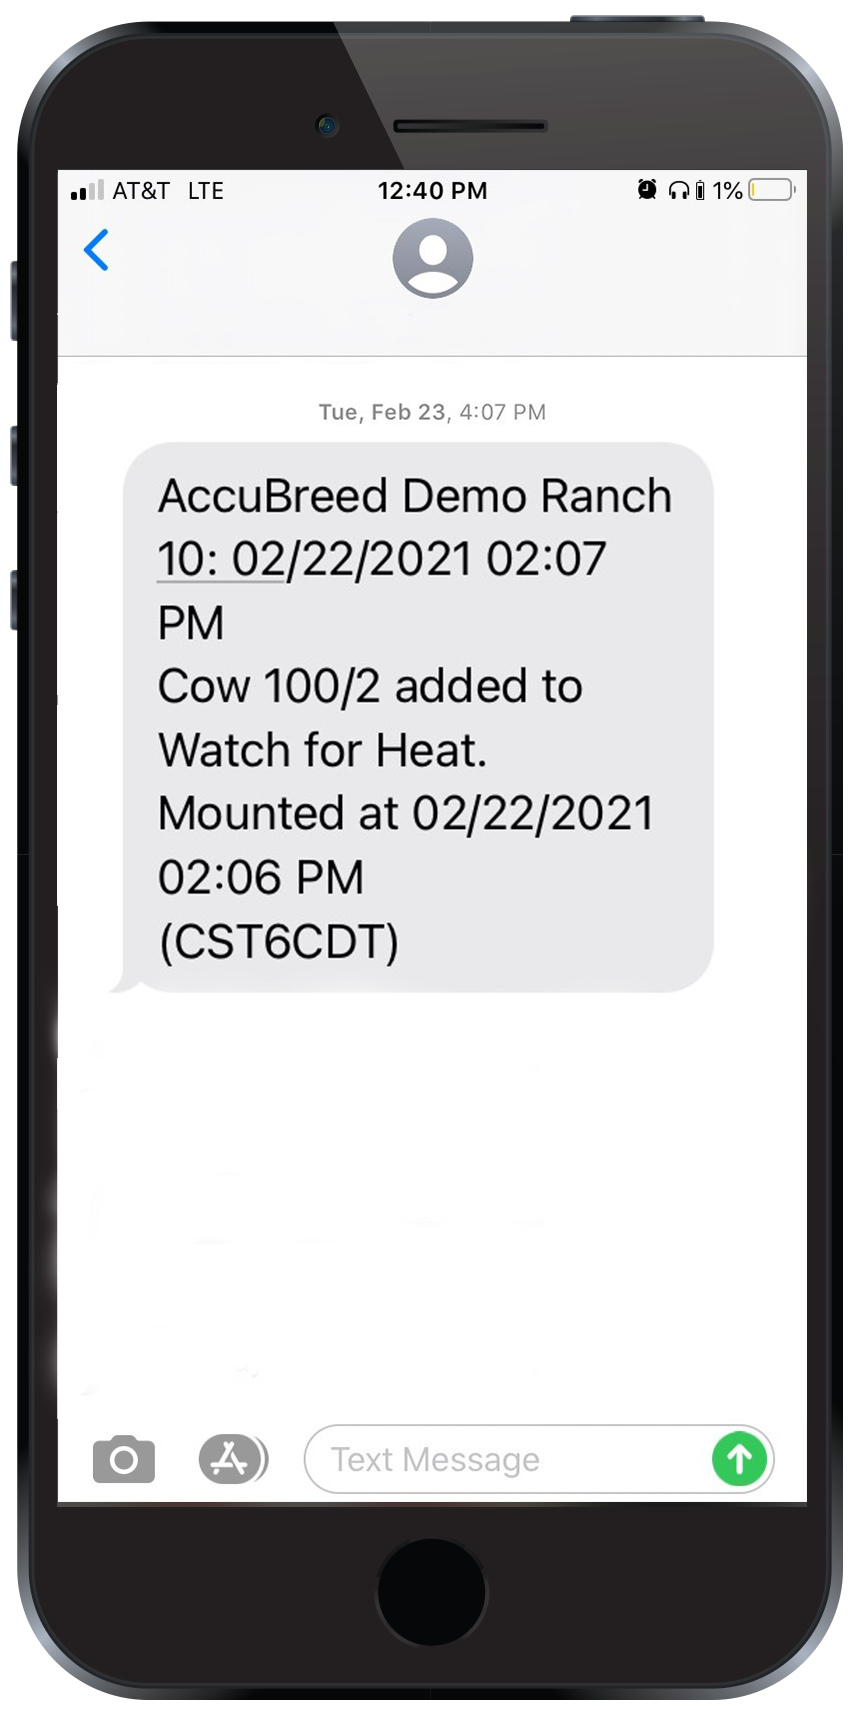 Text message alerts and notifications allow you to stay up-to-date on the go.